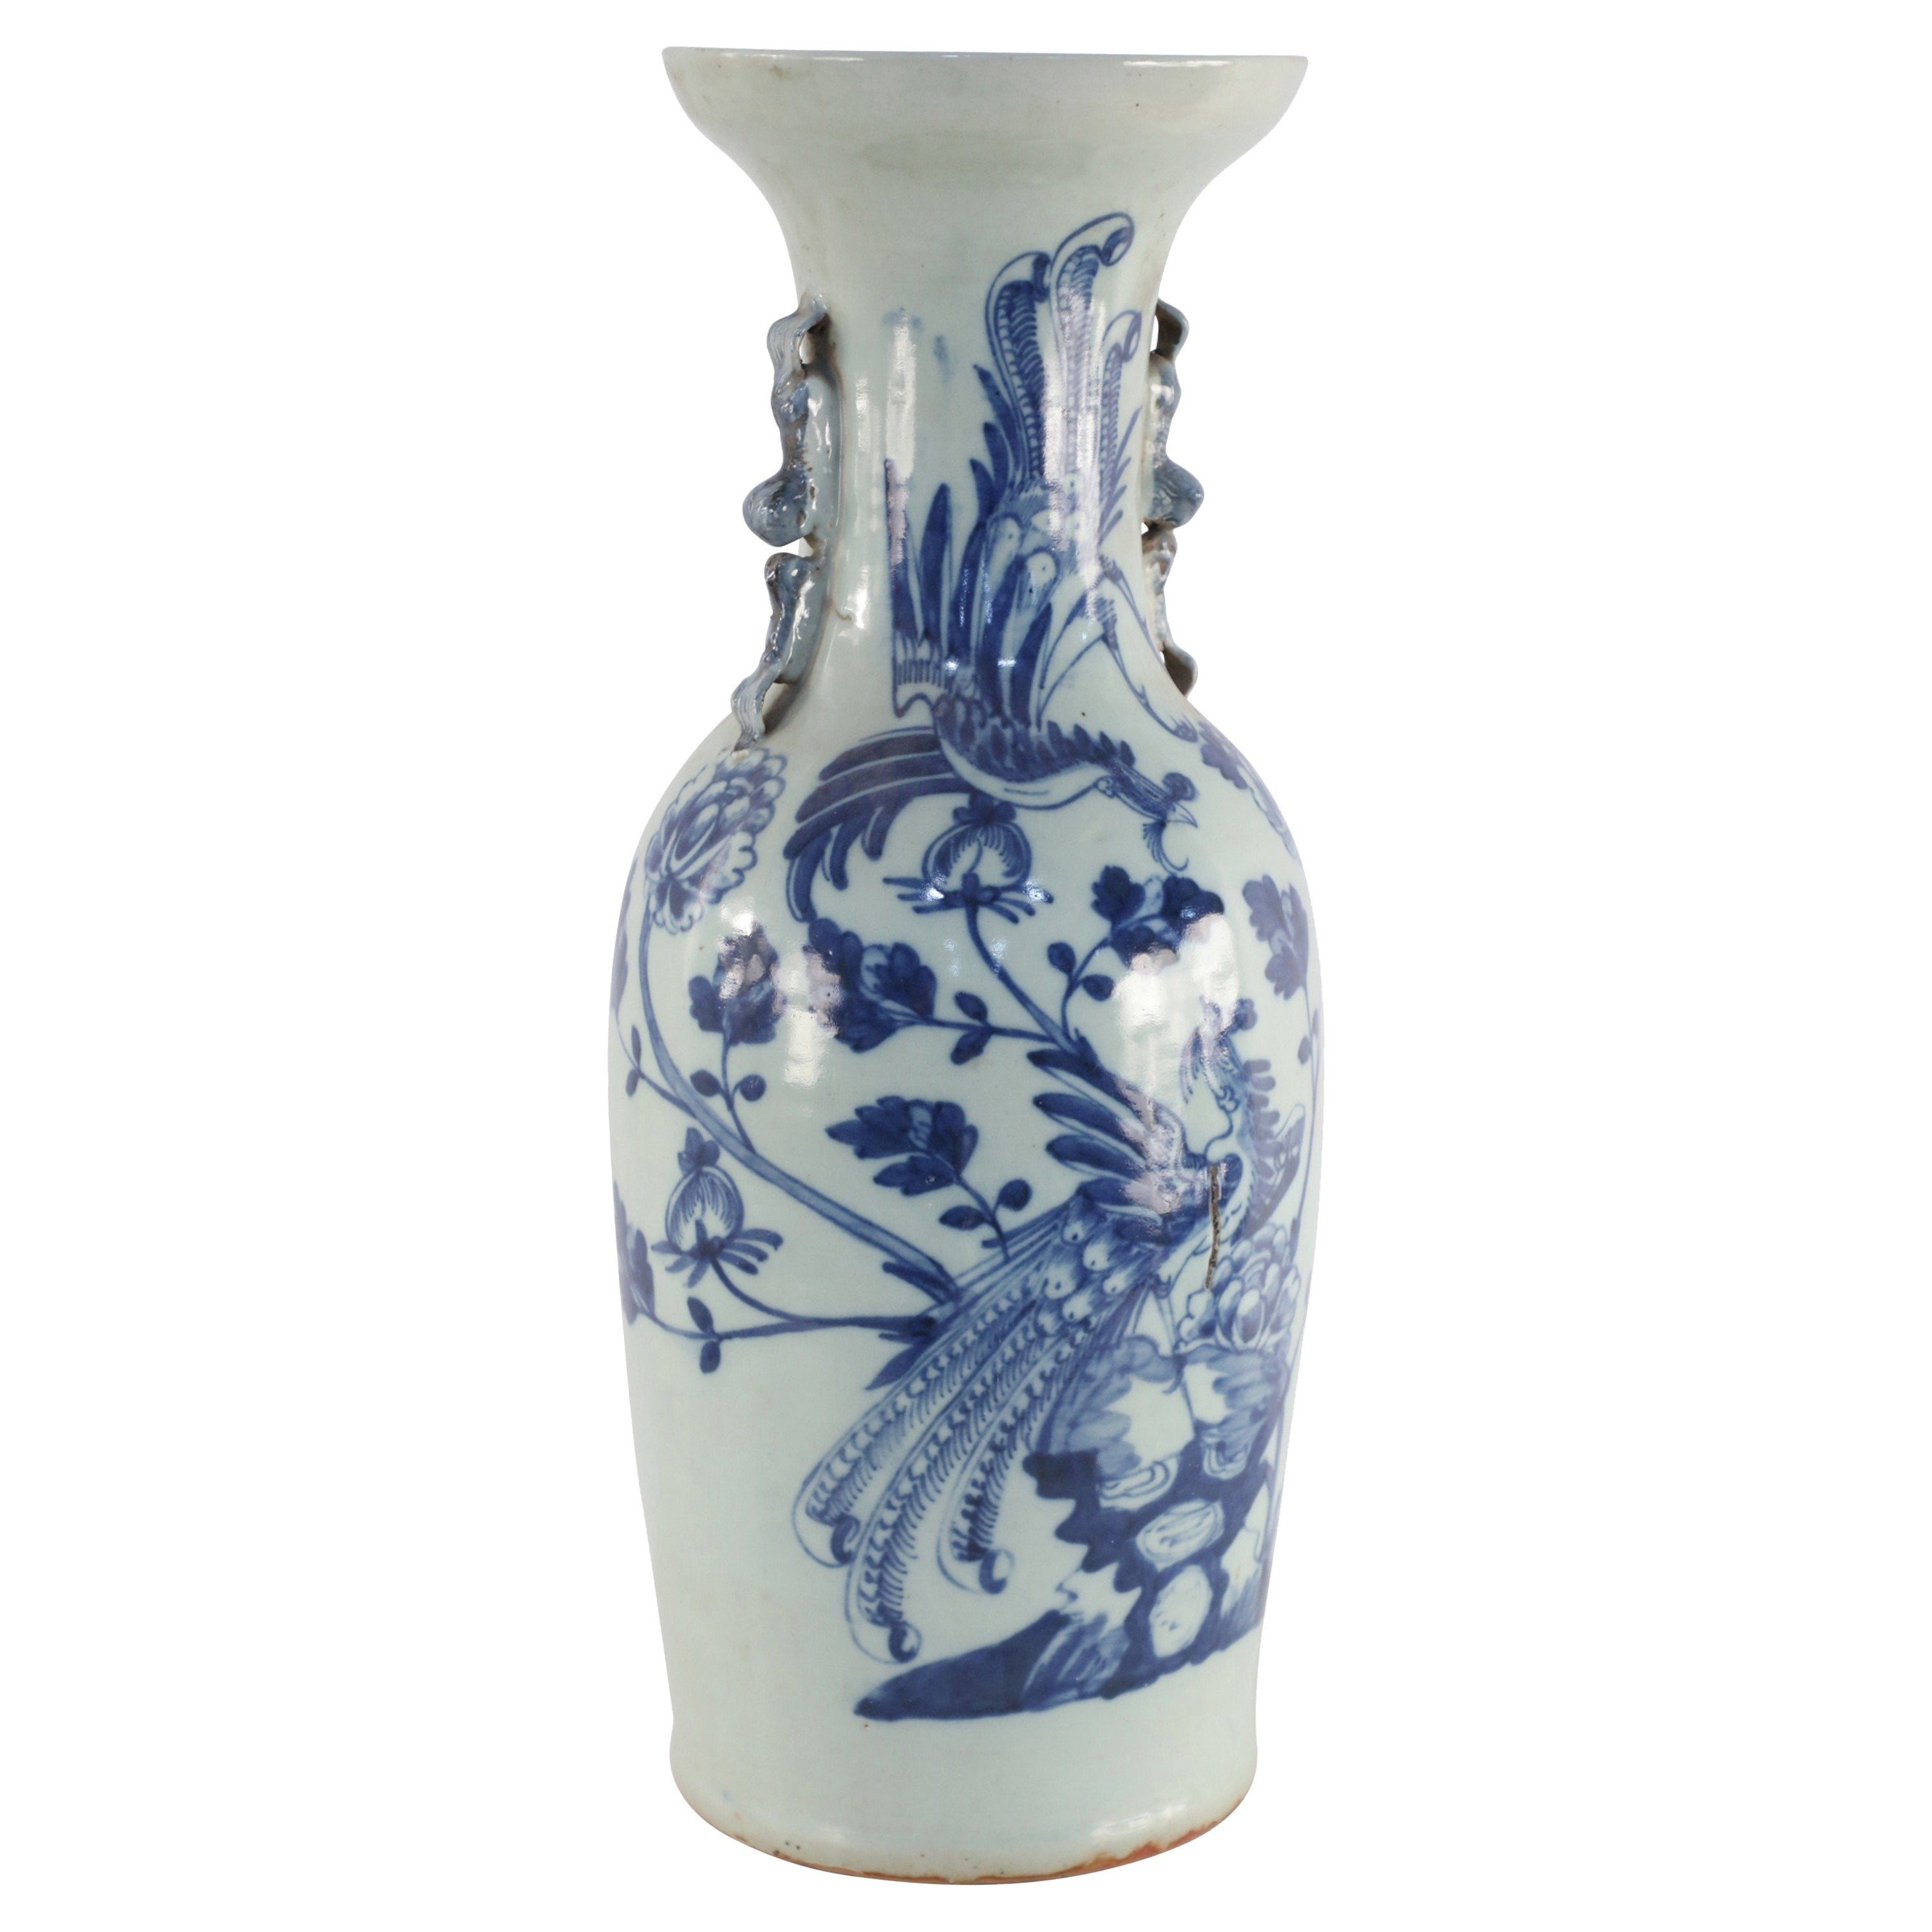 Chinese White and Blue Peacock Motif Porcelain Urn